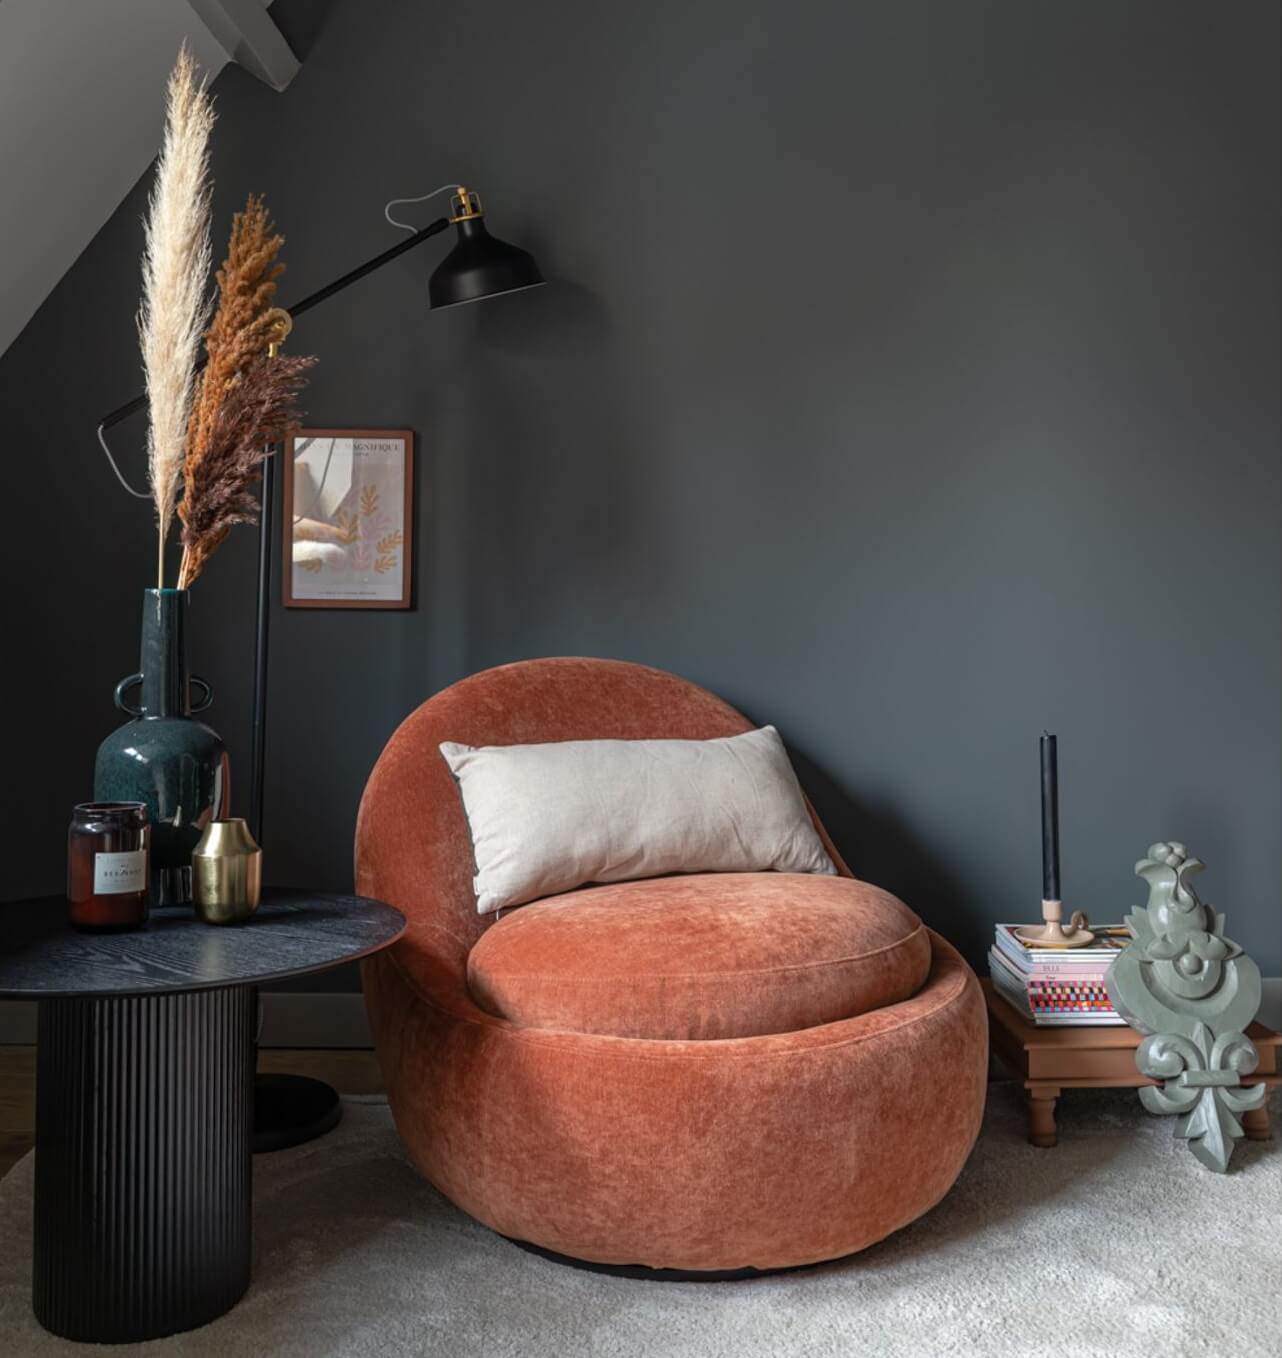 sitting-area-dark-gray-walls-rusty-red-chair-nordroom